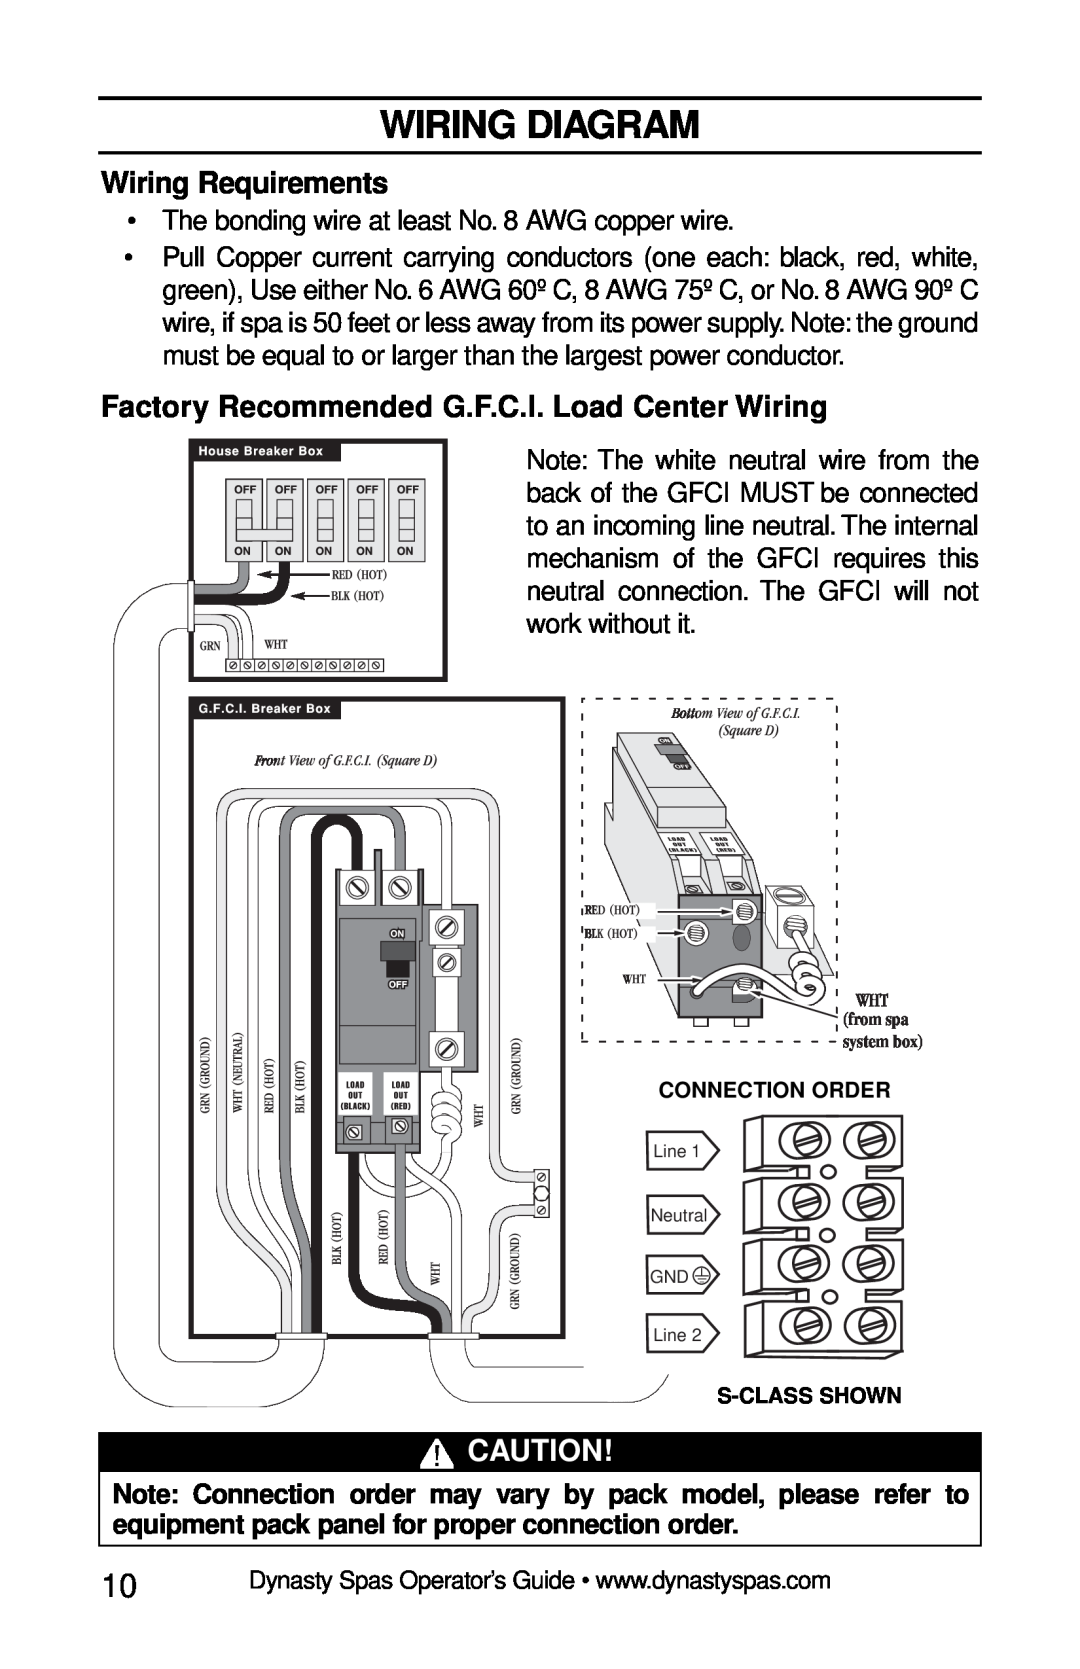 Dynasty Spas 2007 manual Wiring Diagram, Wiring Requirements, Factory Recommended G.F.C.I. Load Center Wiring 